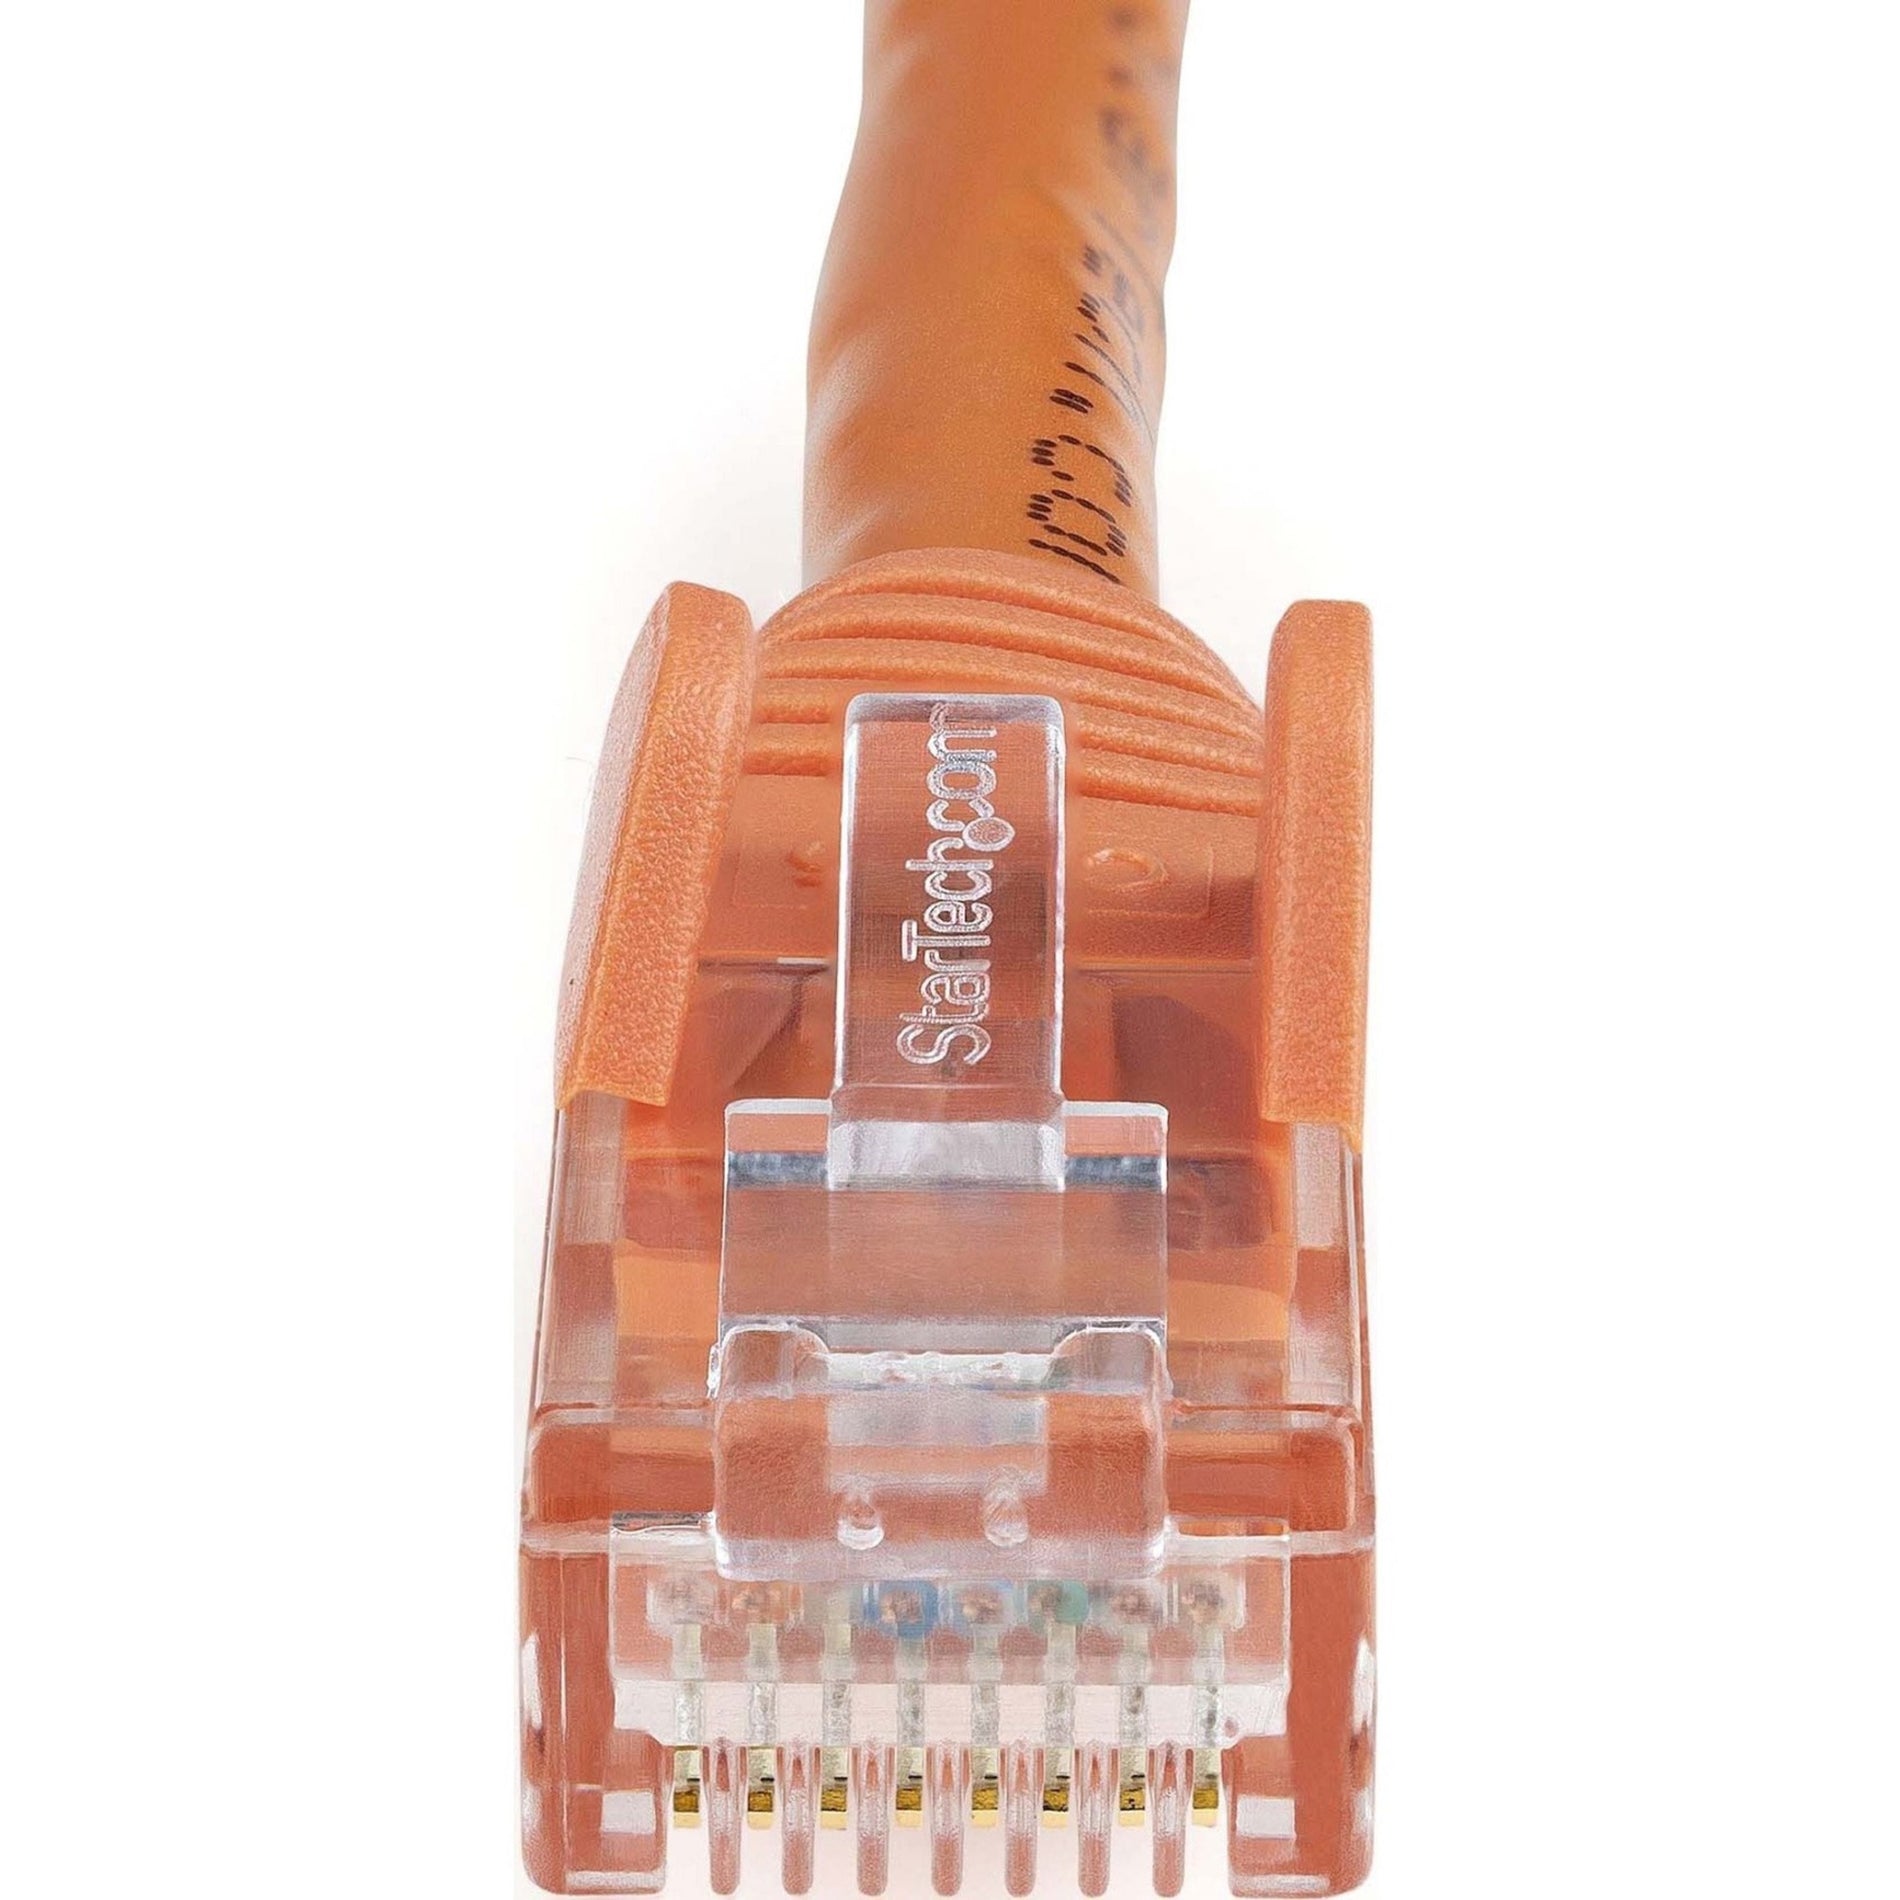 StarTech.com N6PATCH15OR 15 ft Orange Snagless Cat6 UTP Patch Cable, 10 Gbit/s Data Transfer Rate, Lifetime Warranty